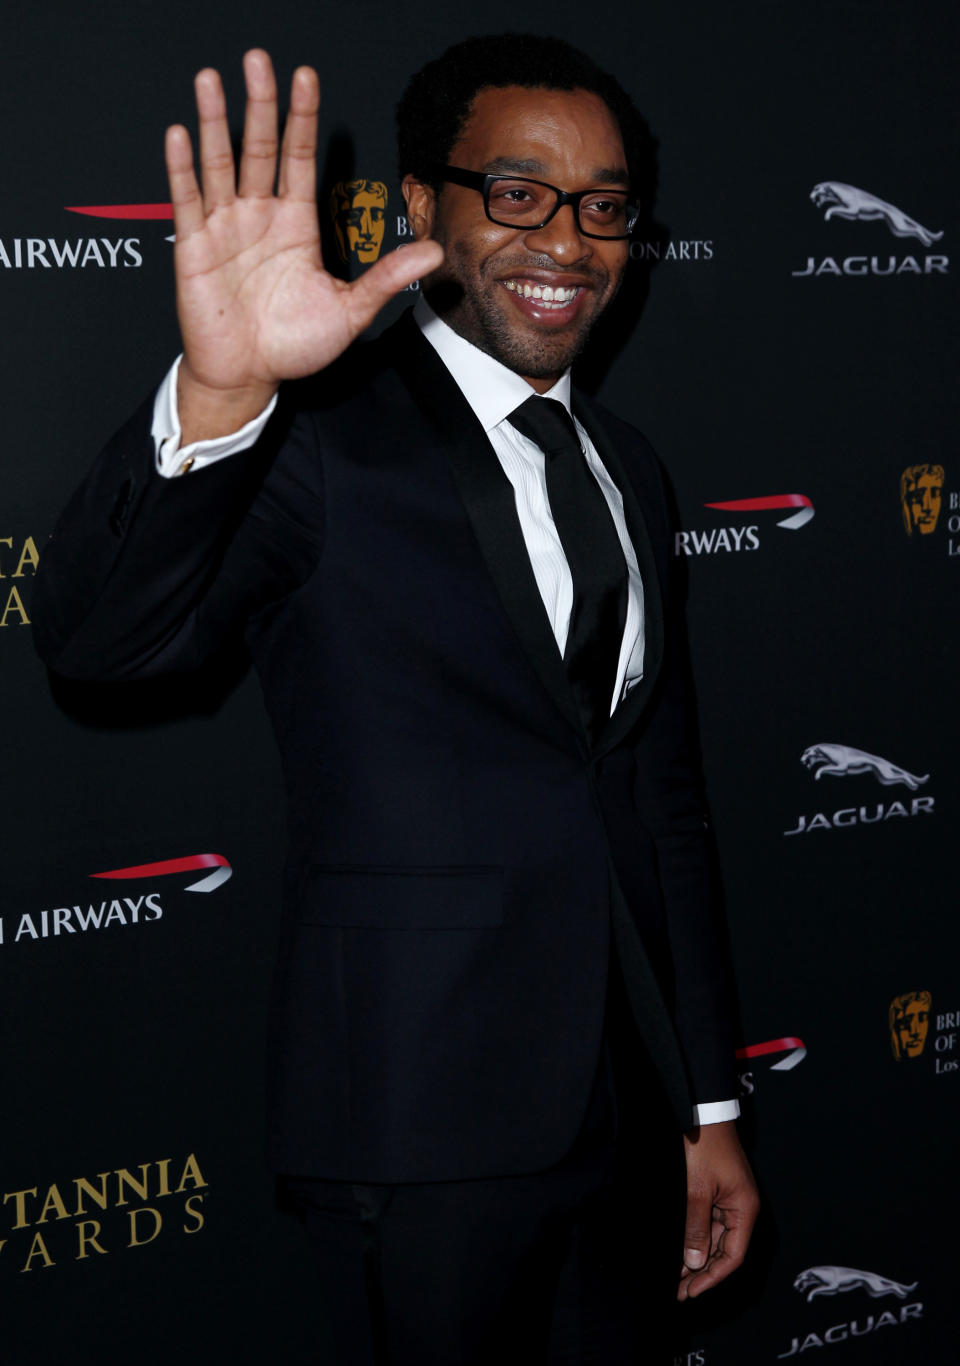 Chiwetel Ejiofor arrives at the 2013 BAFTA Los Angeles Britannia Awards at the Beverly Hilton Hotel on Saturday, Nov. 9, 2013 in Beverly Hills, Calif. (Photo by Matt Sayles/Invision/AP)